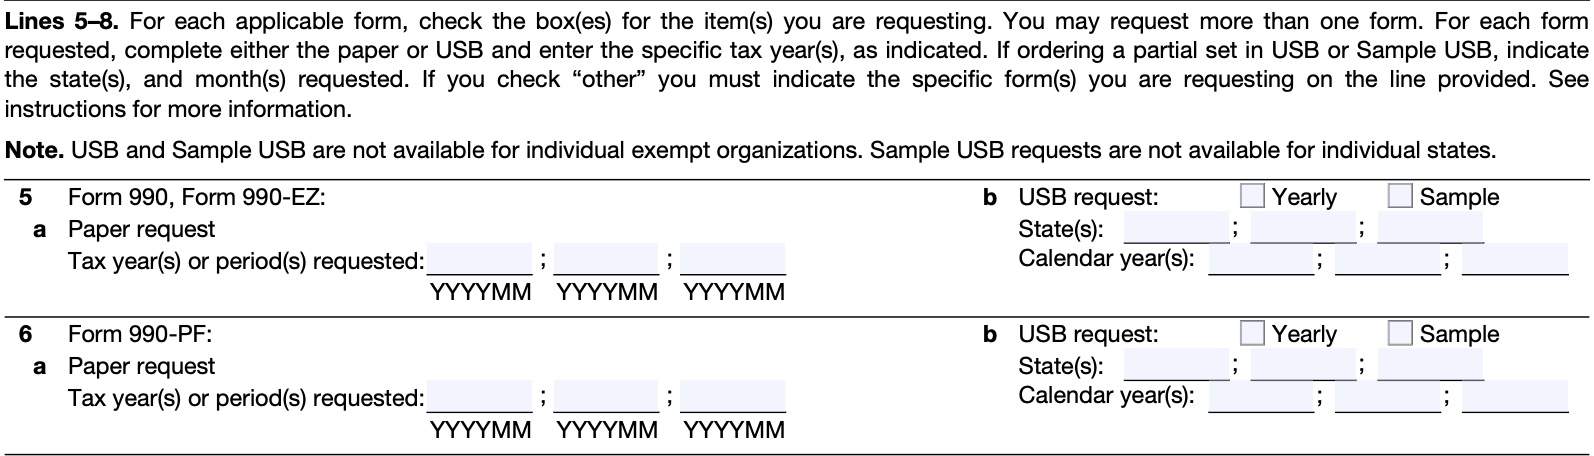 irs form 4506-a, lines 5-6